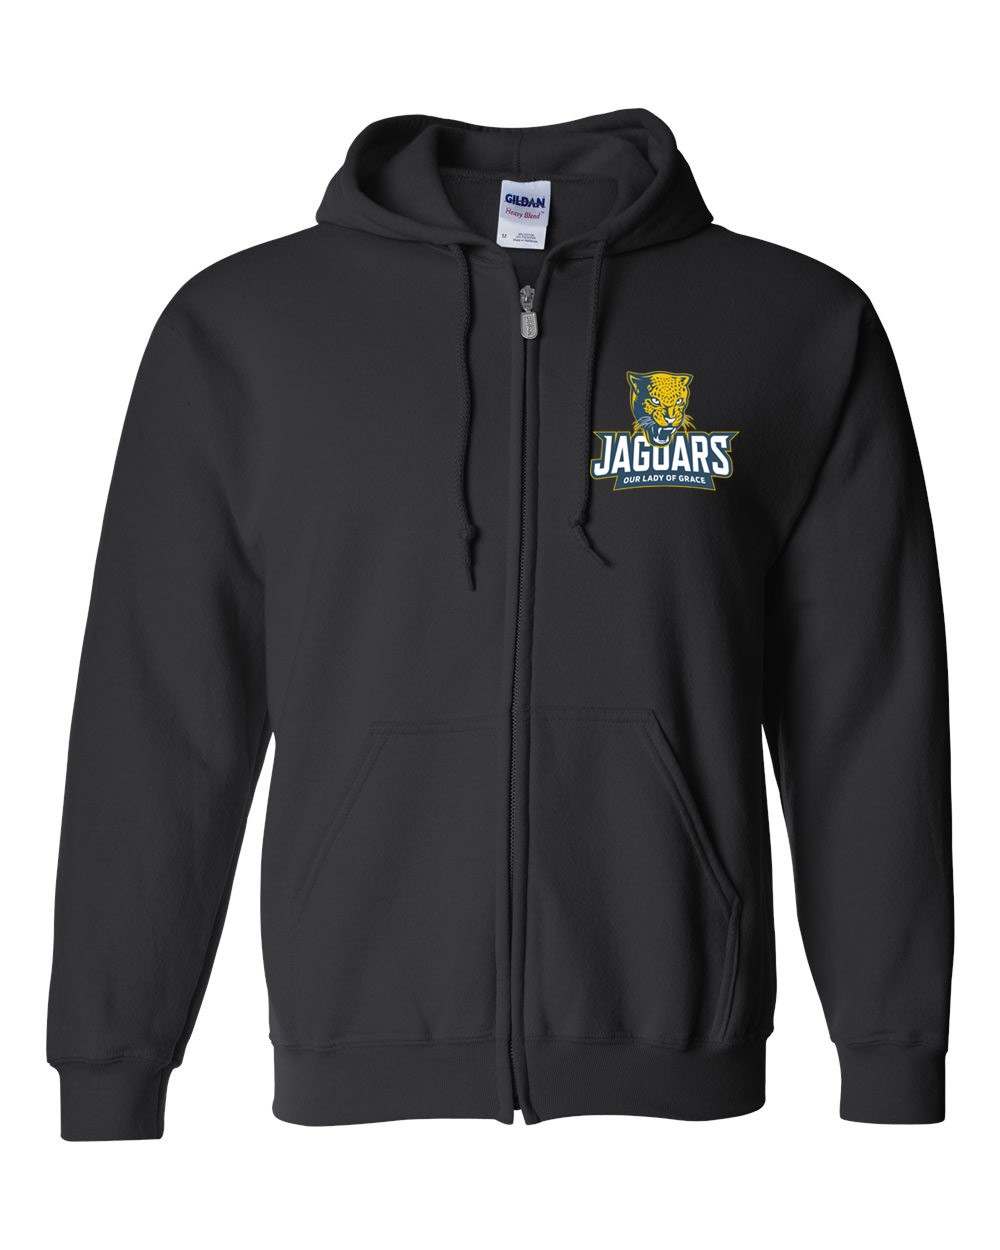 OLG Staff Zipper Hoodie w/ Logo #F33-F34- Please Allow 2-3 Weeks for Delivery